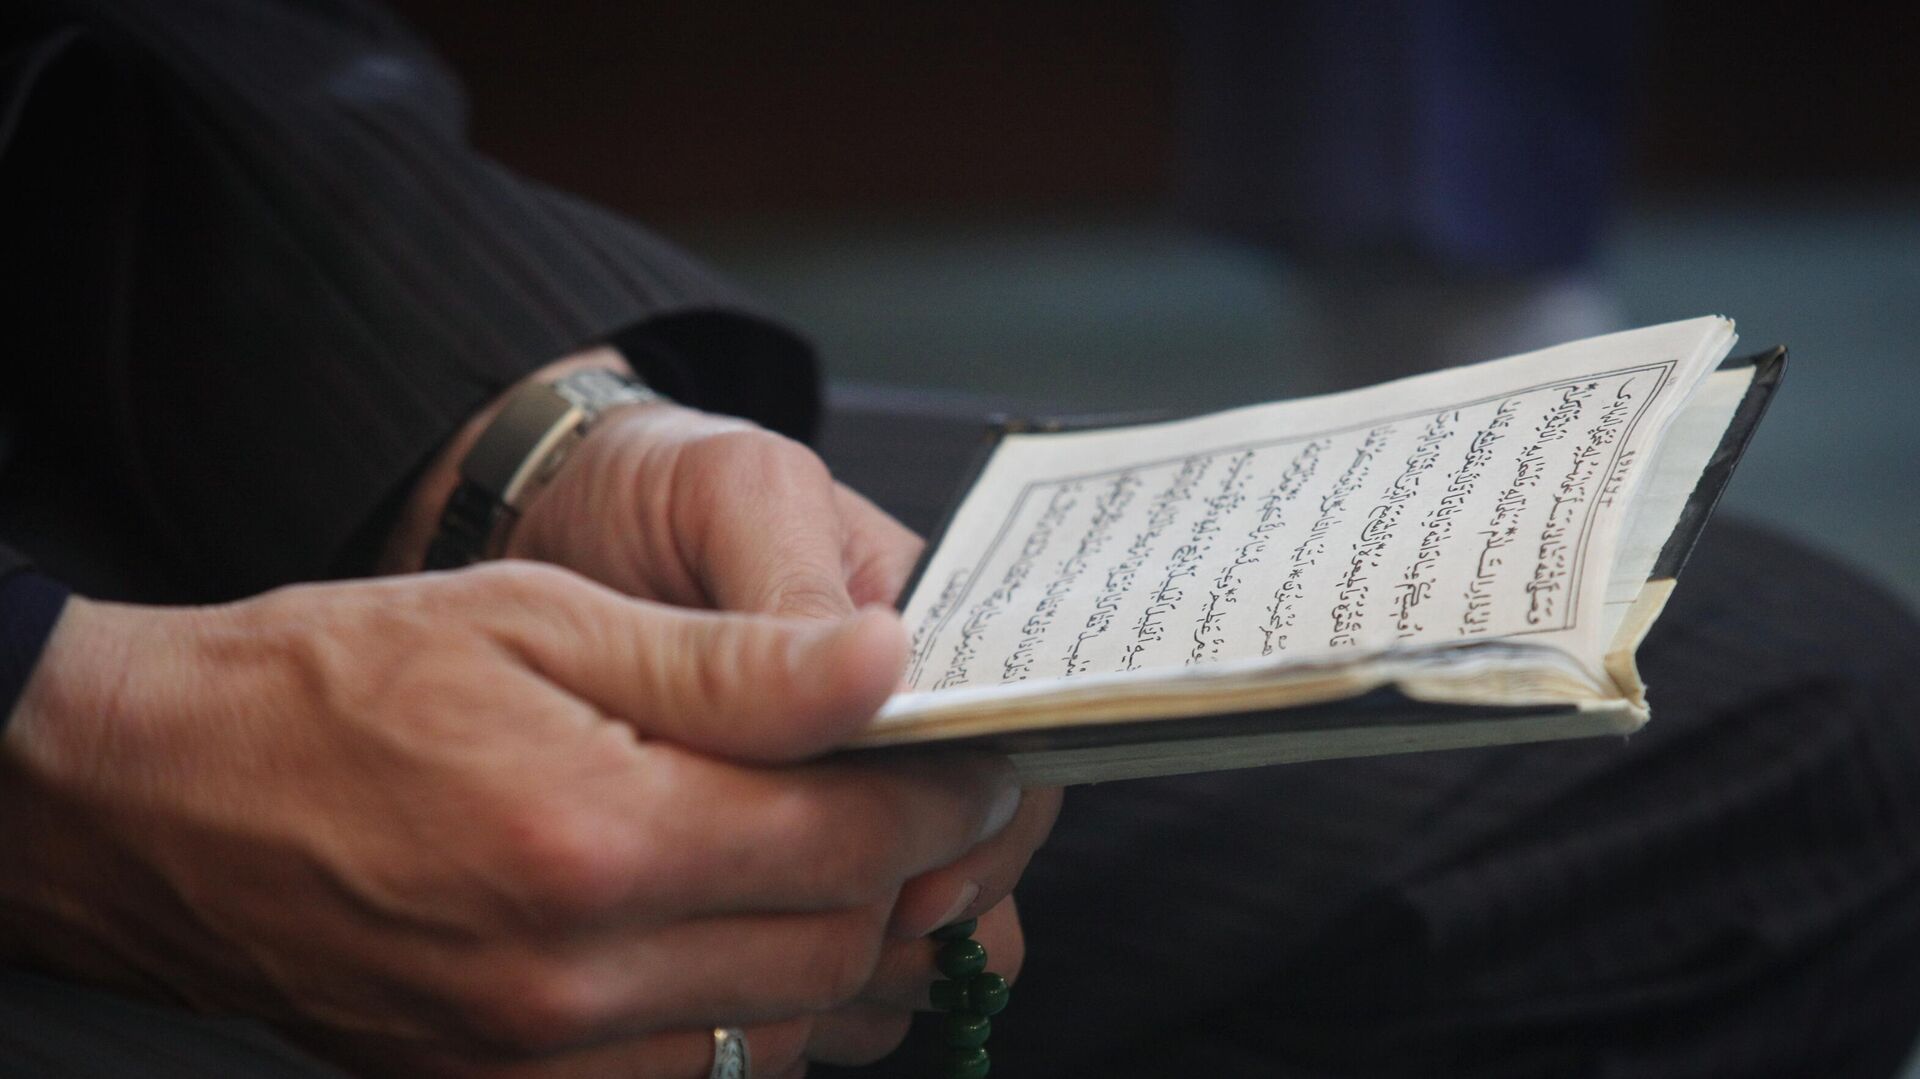 Turkey’s Ministry of Foreign Affairs condemns the disrespect for the Qur’an in Denmark